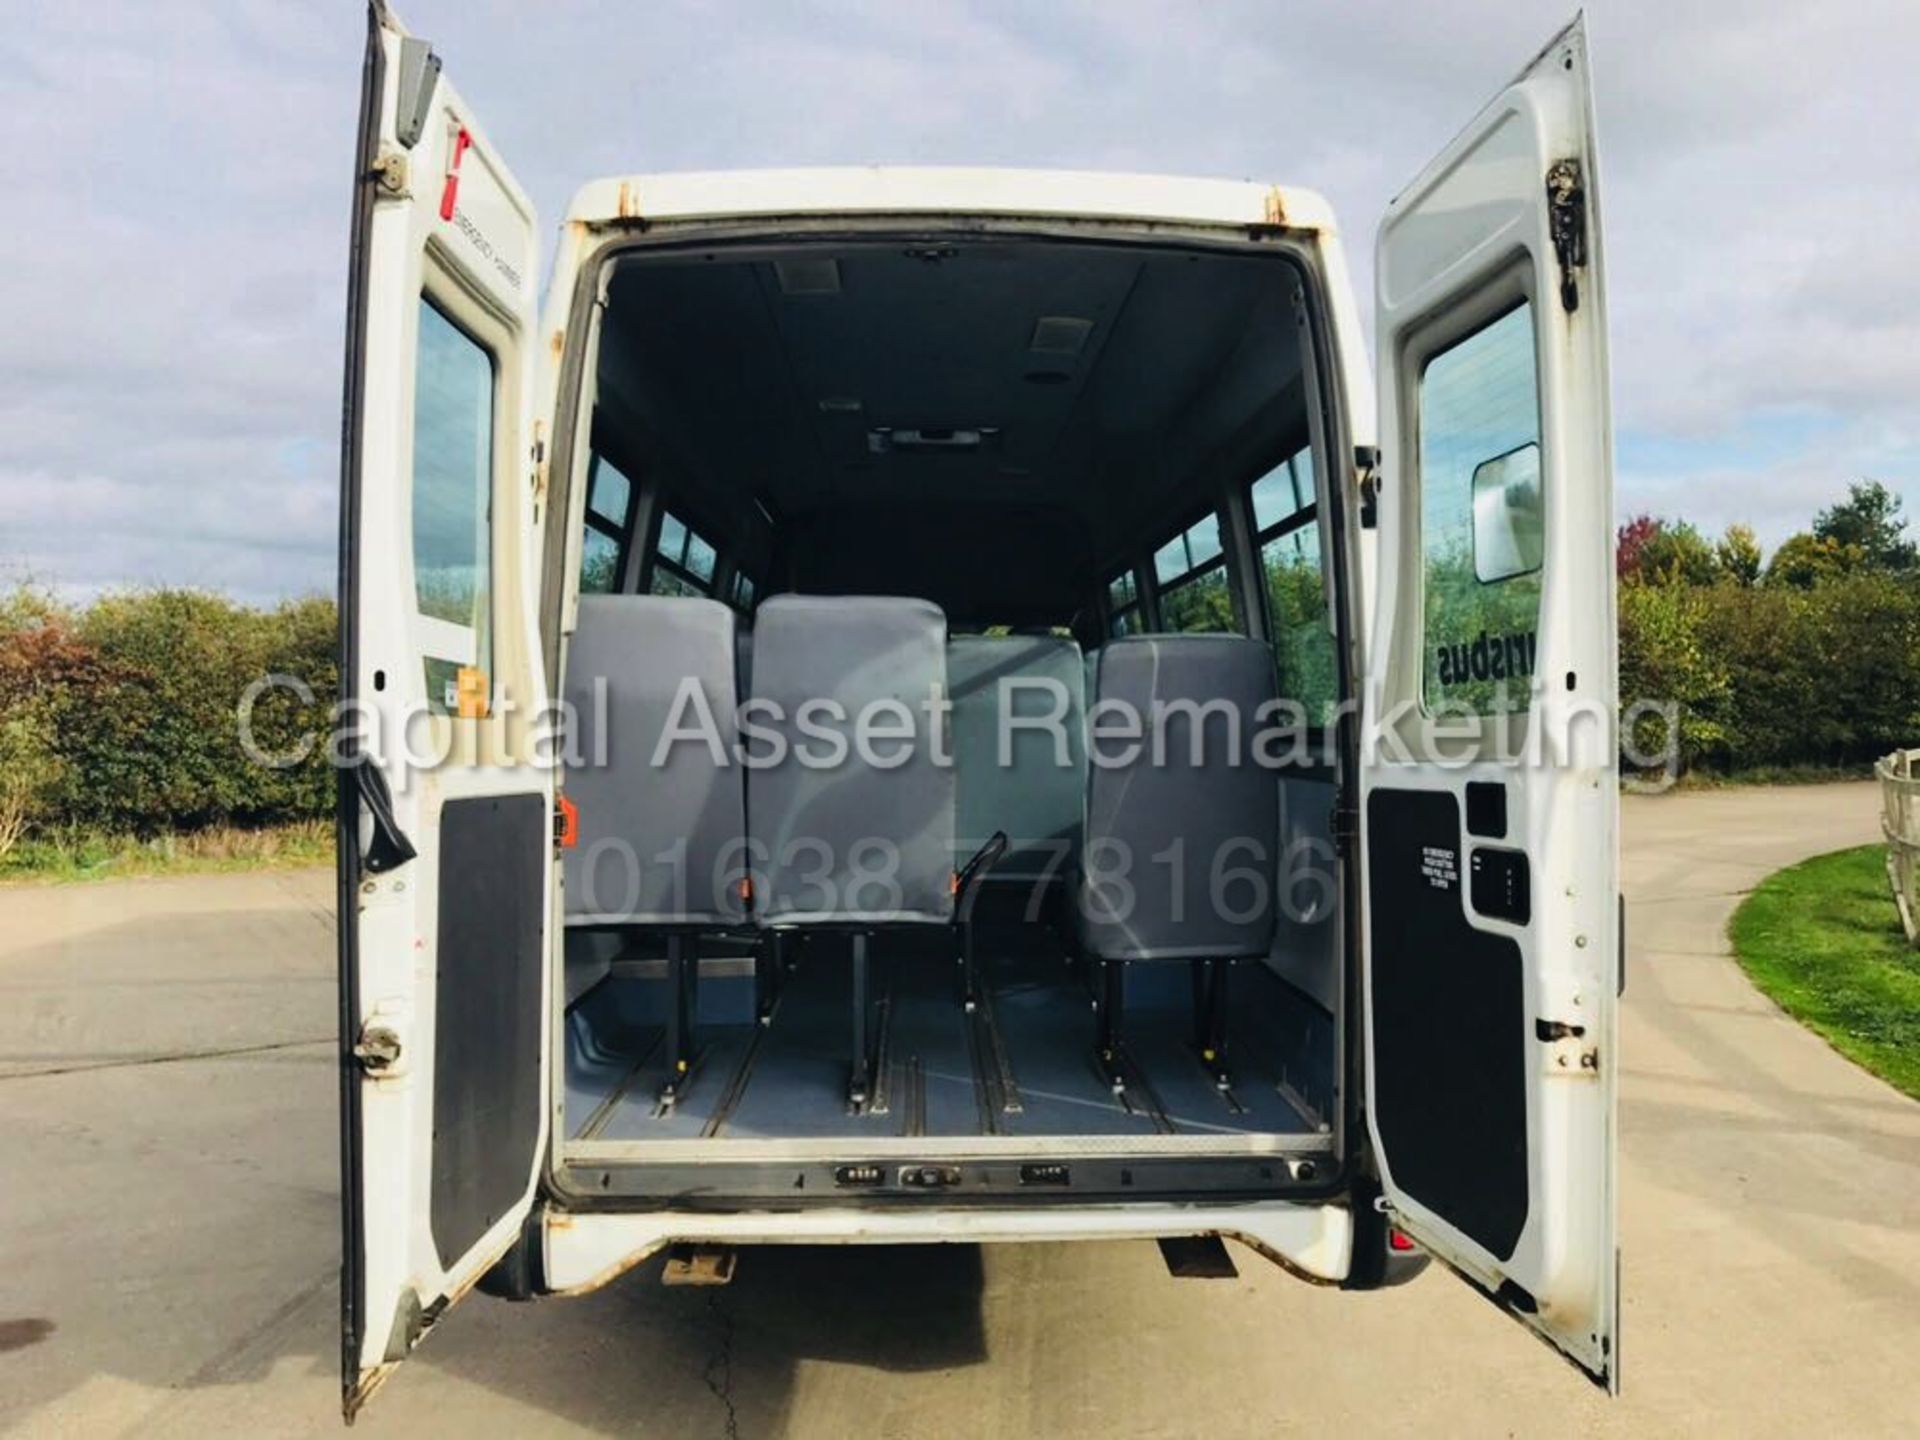 IVECO DAILY 40C13 LWB HI-ROOF (2006 - 06 REG) *17 SEATER COACH / MINI-BUS* '2.8 -130 BHP - 6 SPEED' - Image 10 of 26